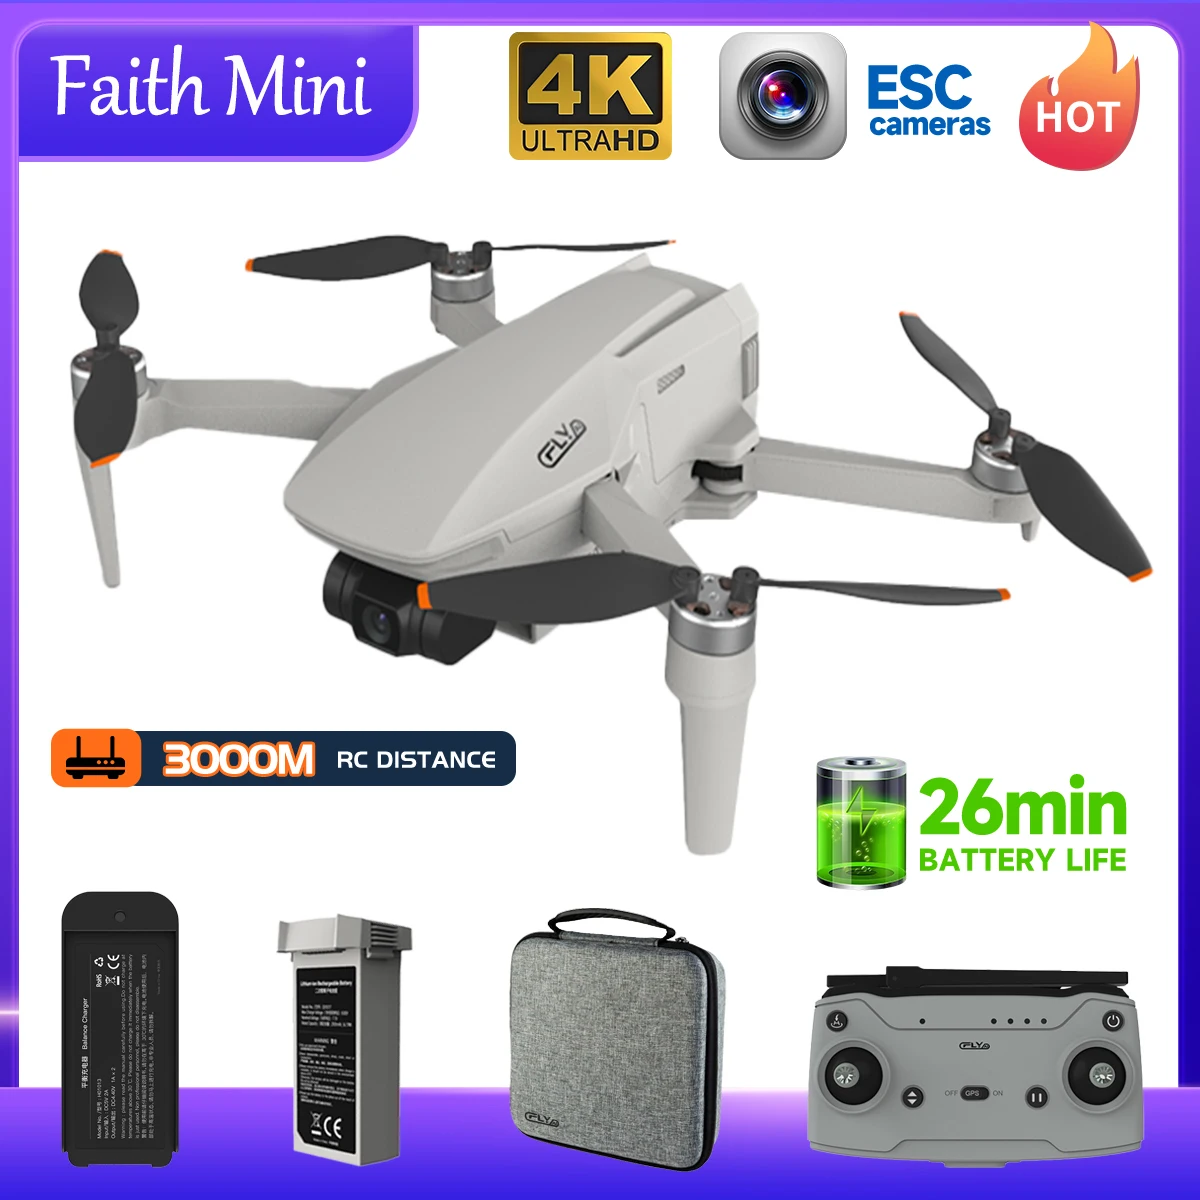 

New FAITH Mini Drone 4K Professional GPS HD Camera 3-Axis Gimbal RC Quadcopter 3KM FPV 26min Flight 249g Mini Helicopter RC Toys